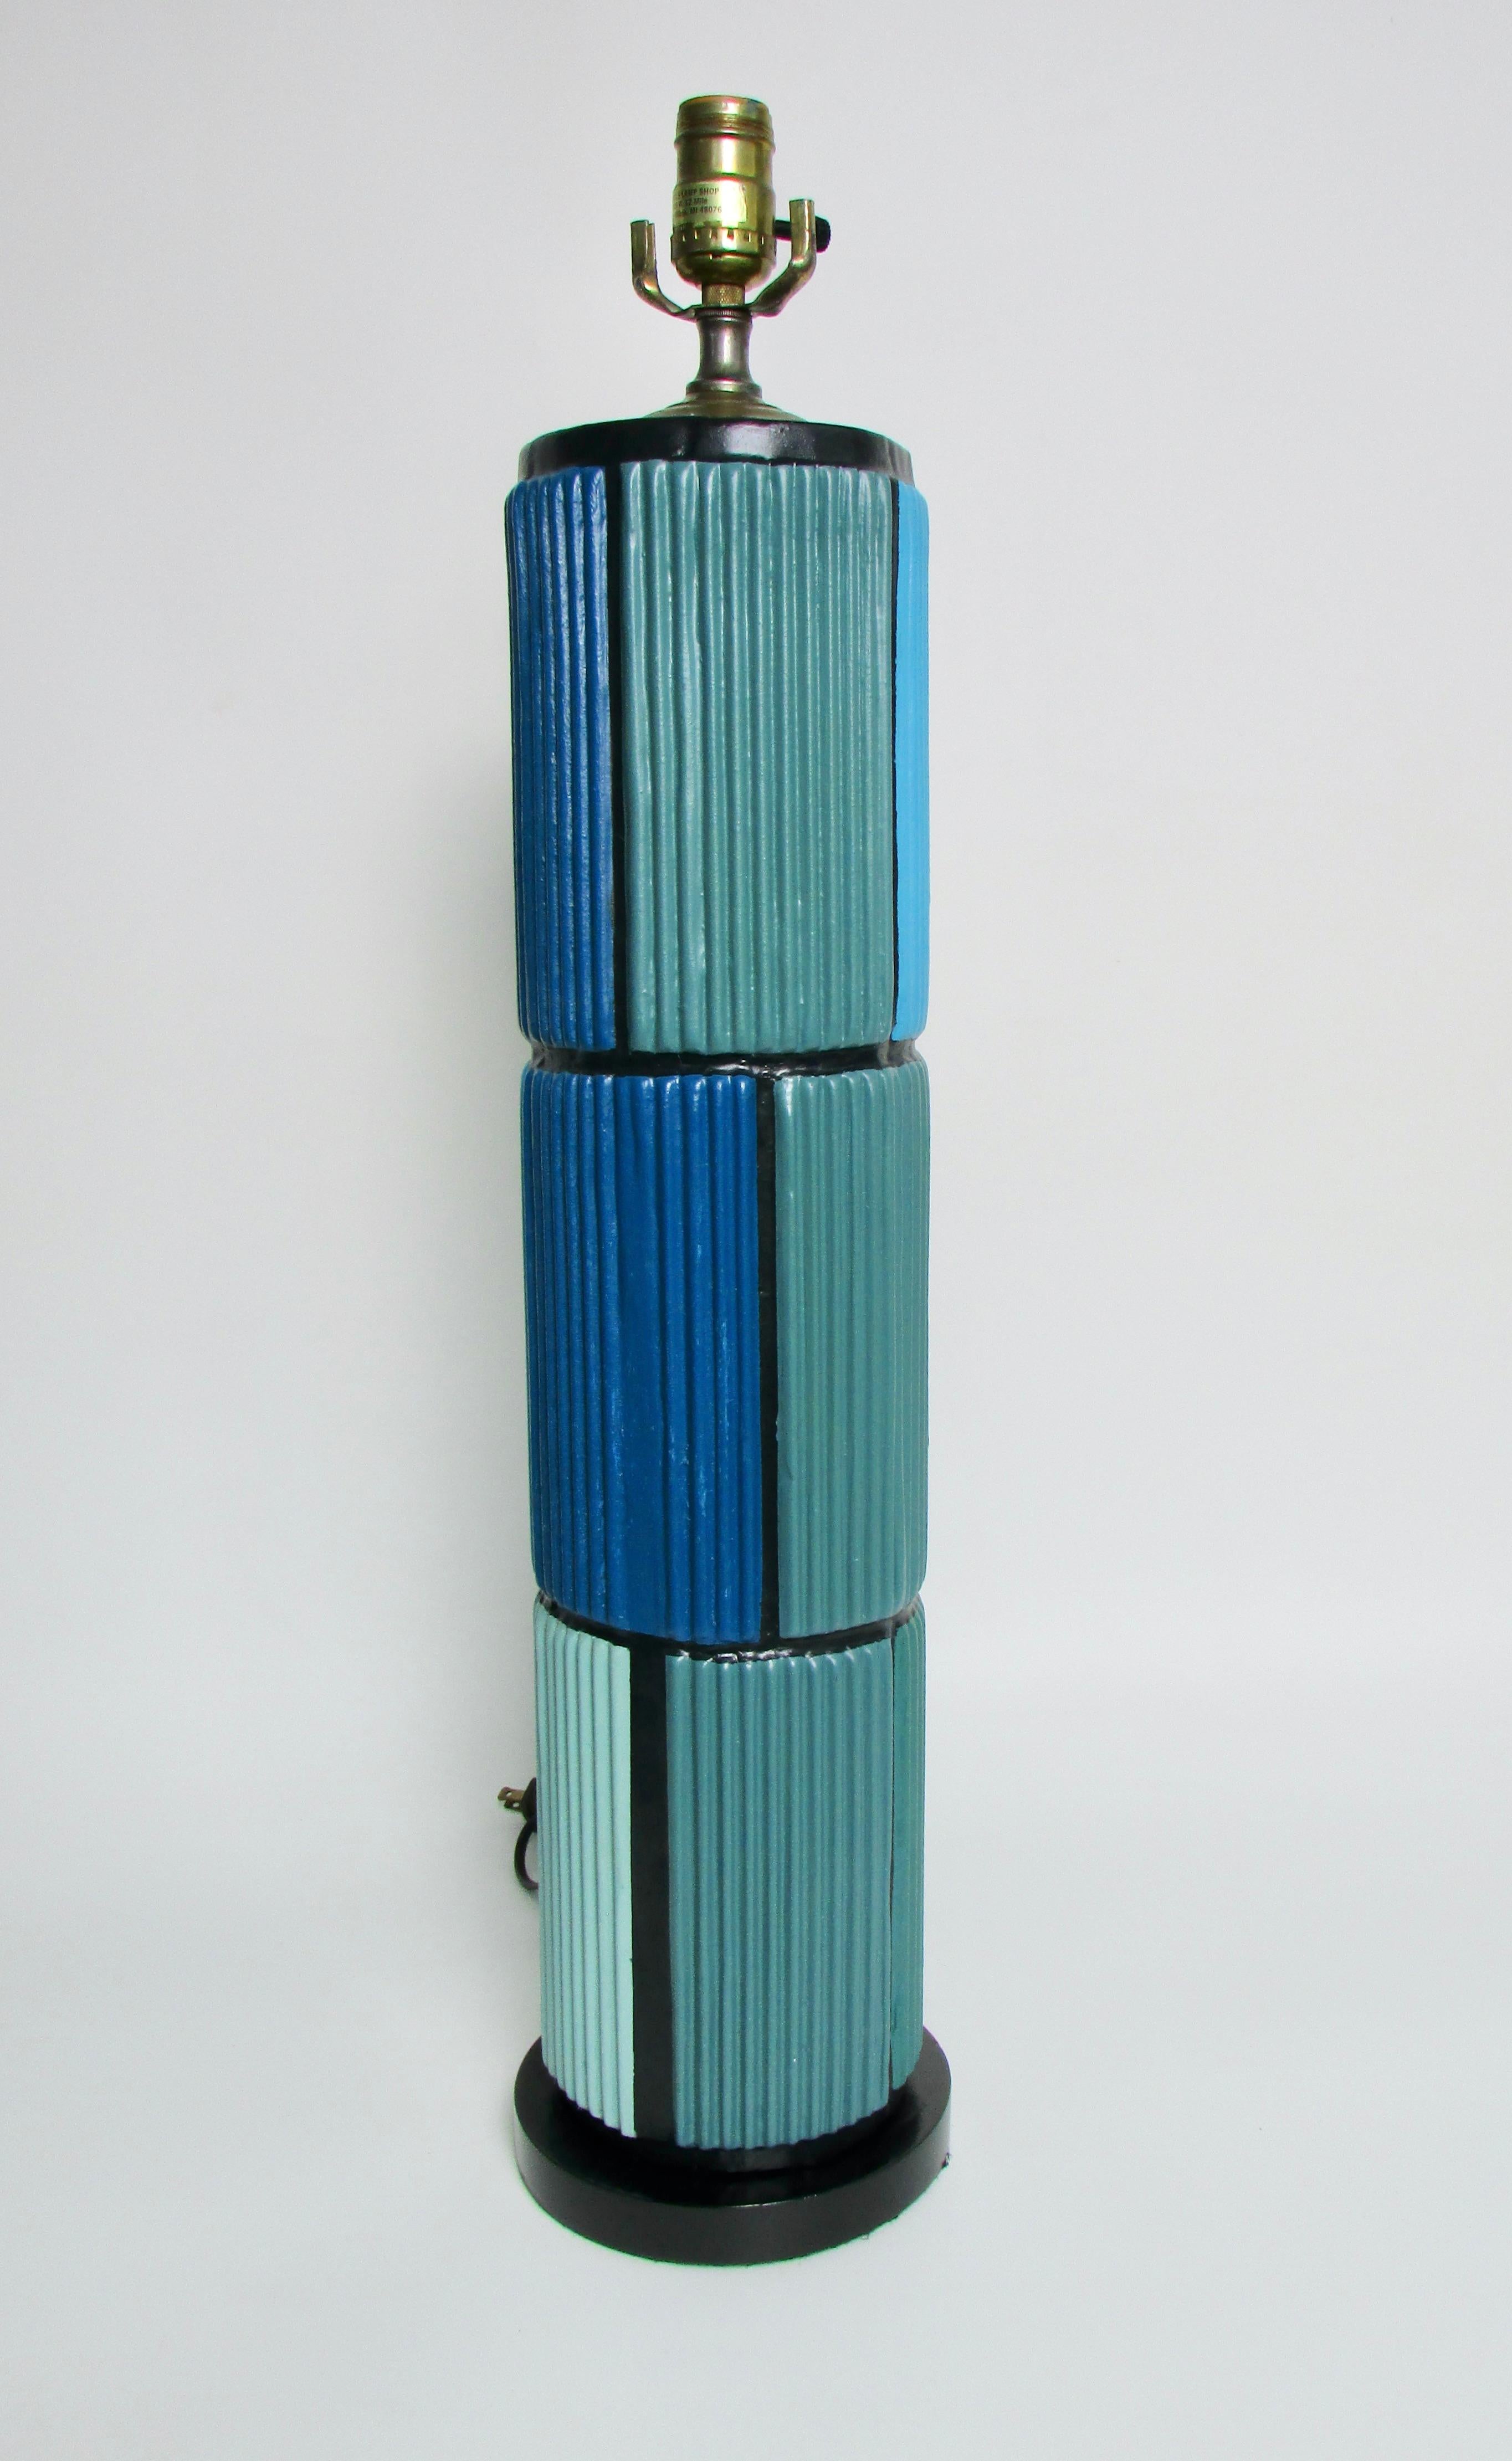 Tall cylindrical table lamp . Painted Mondrian style in shades of blue . Base has 6.5